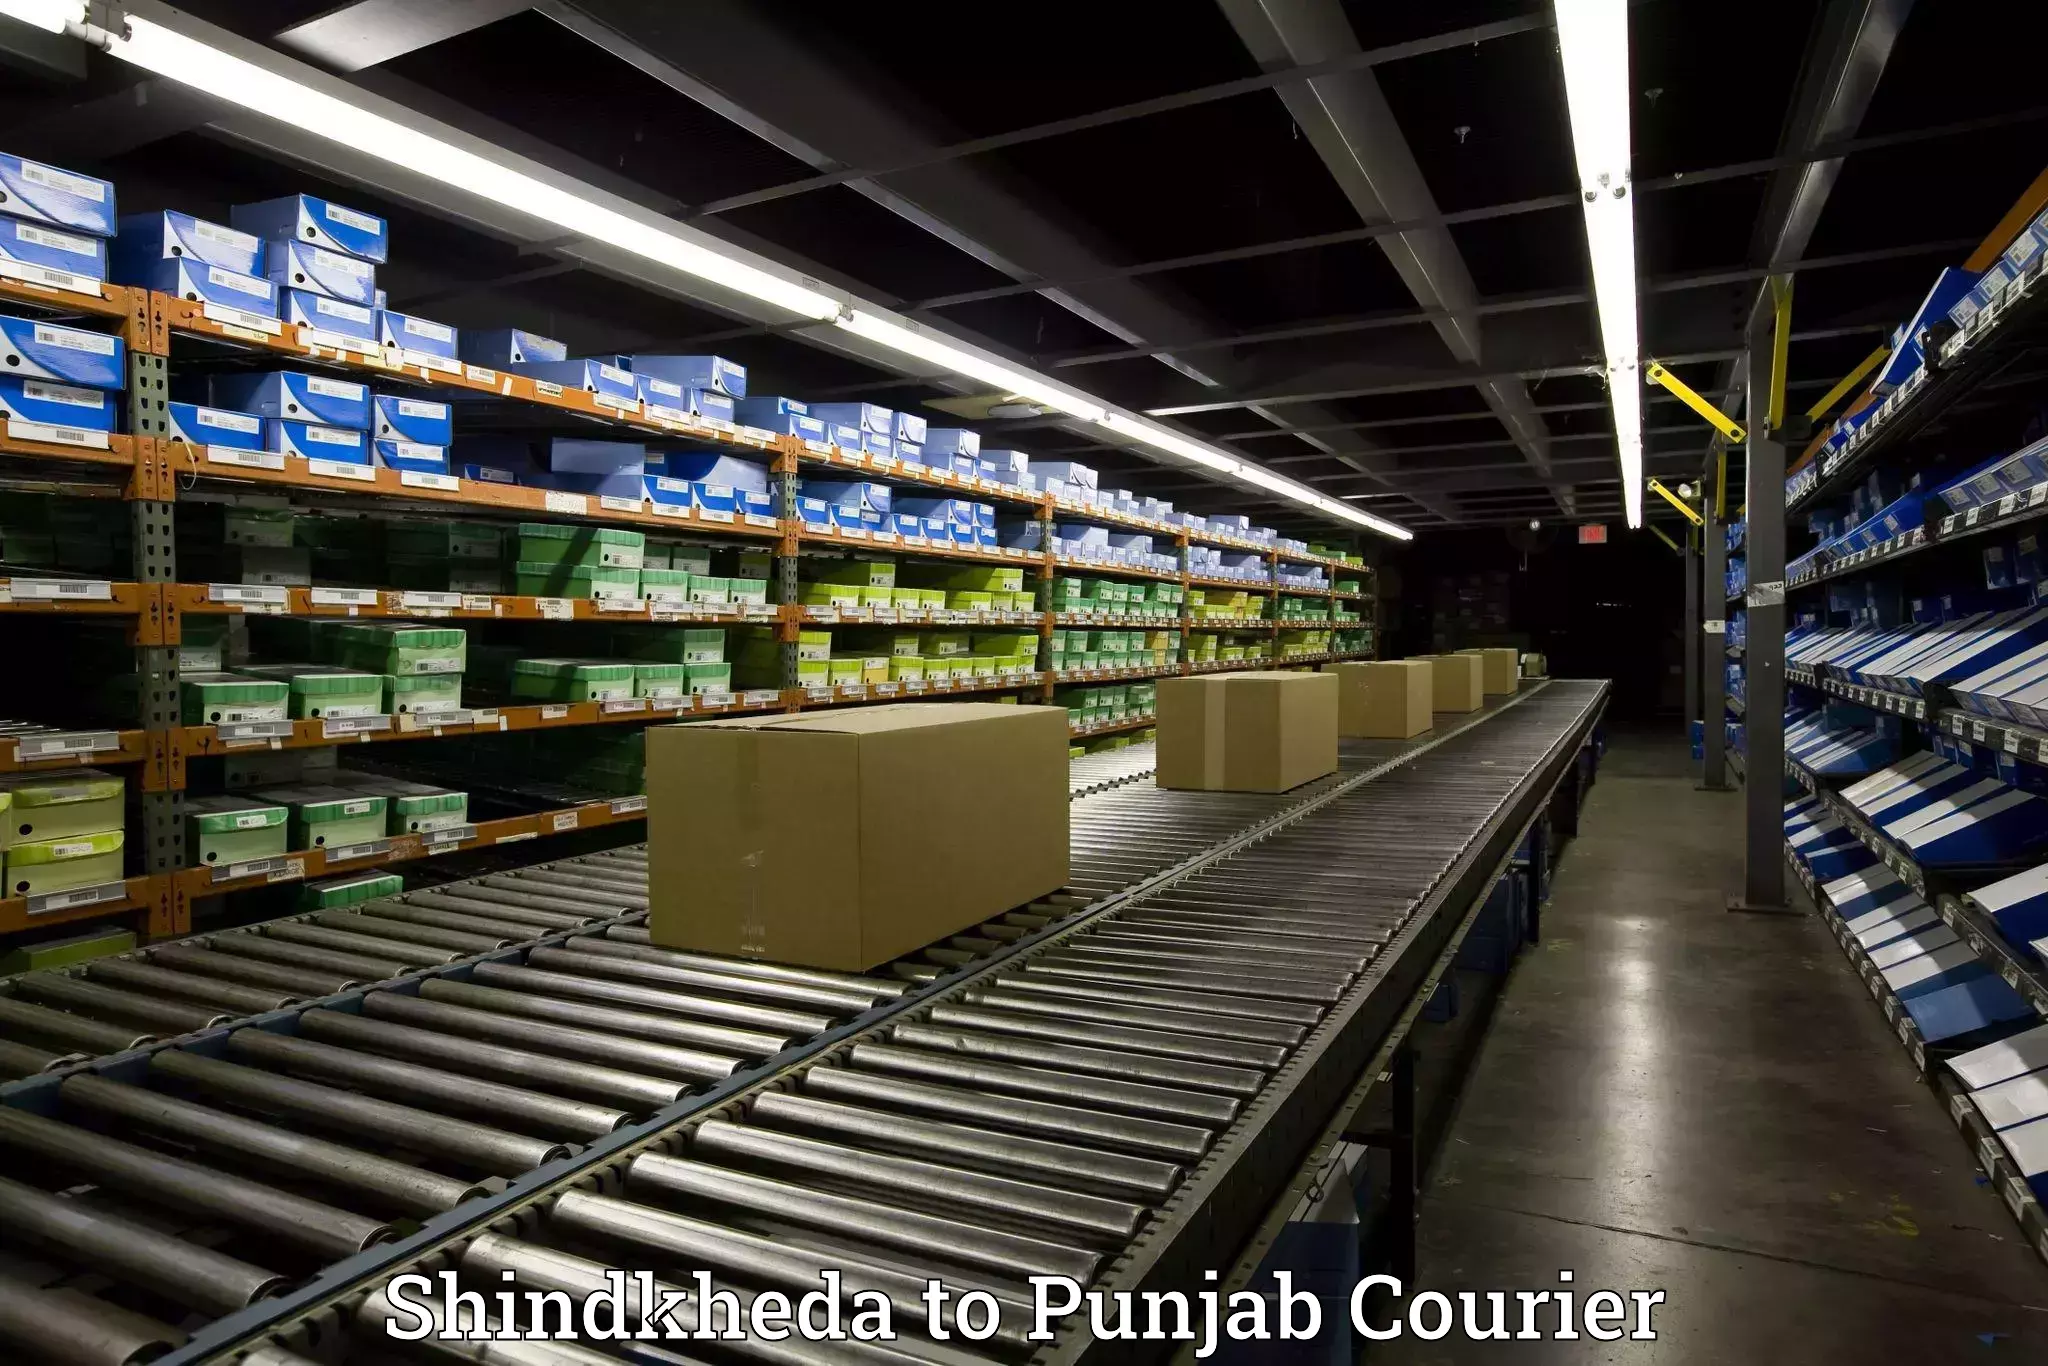 Quality relocation services Shindkheda to Punjab